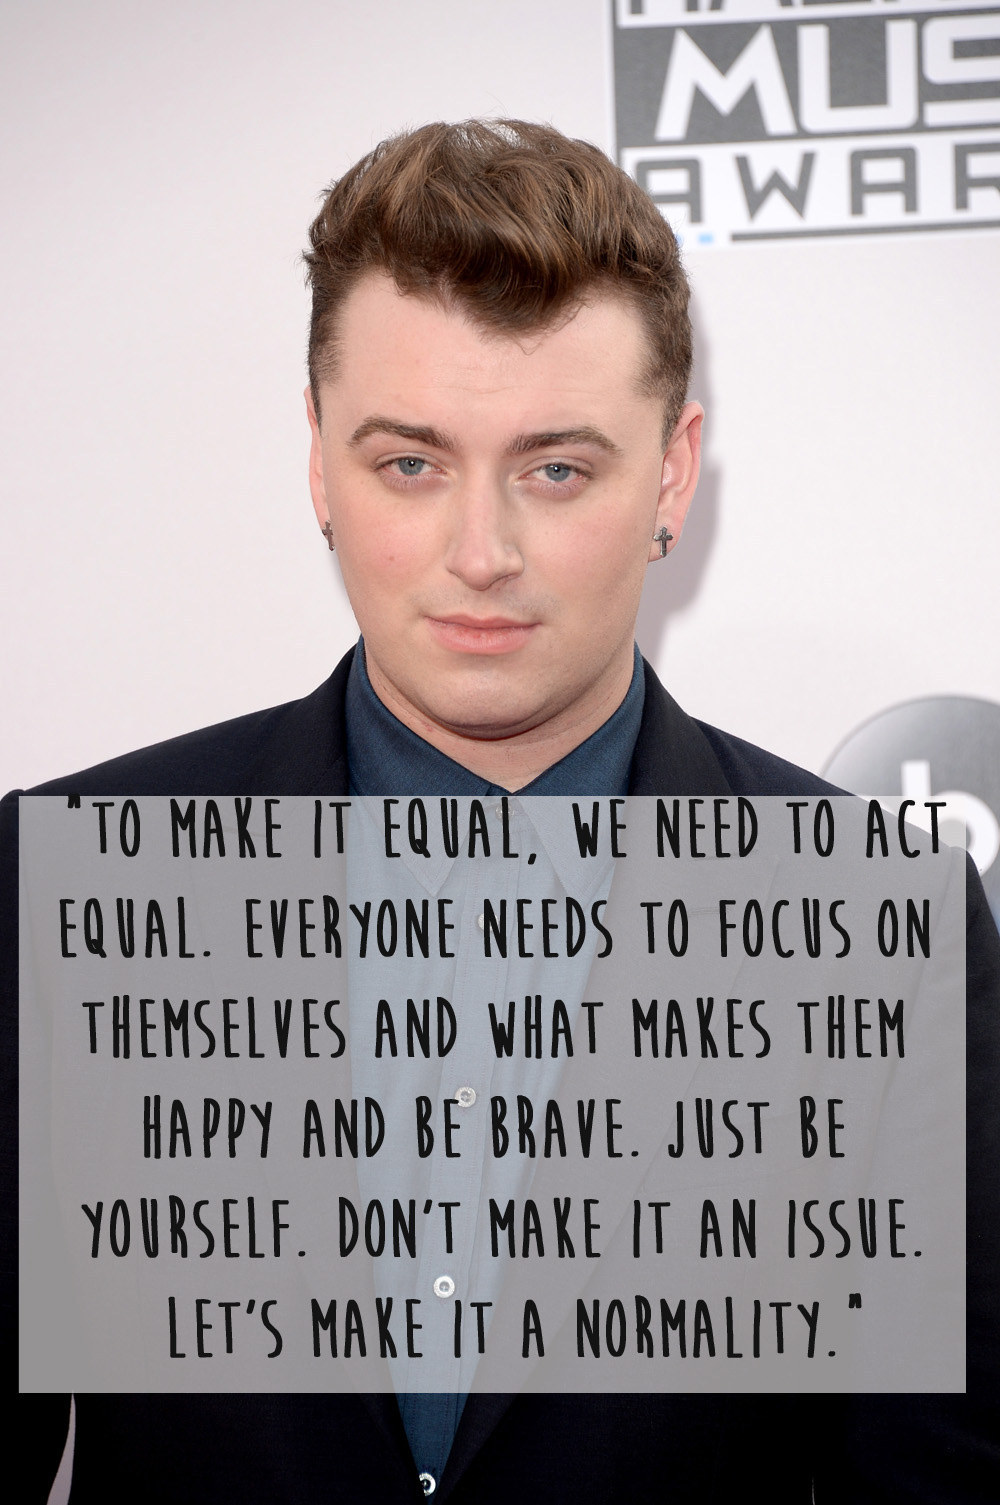 media quotes about sam smith